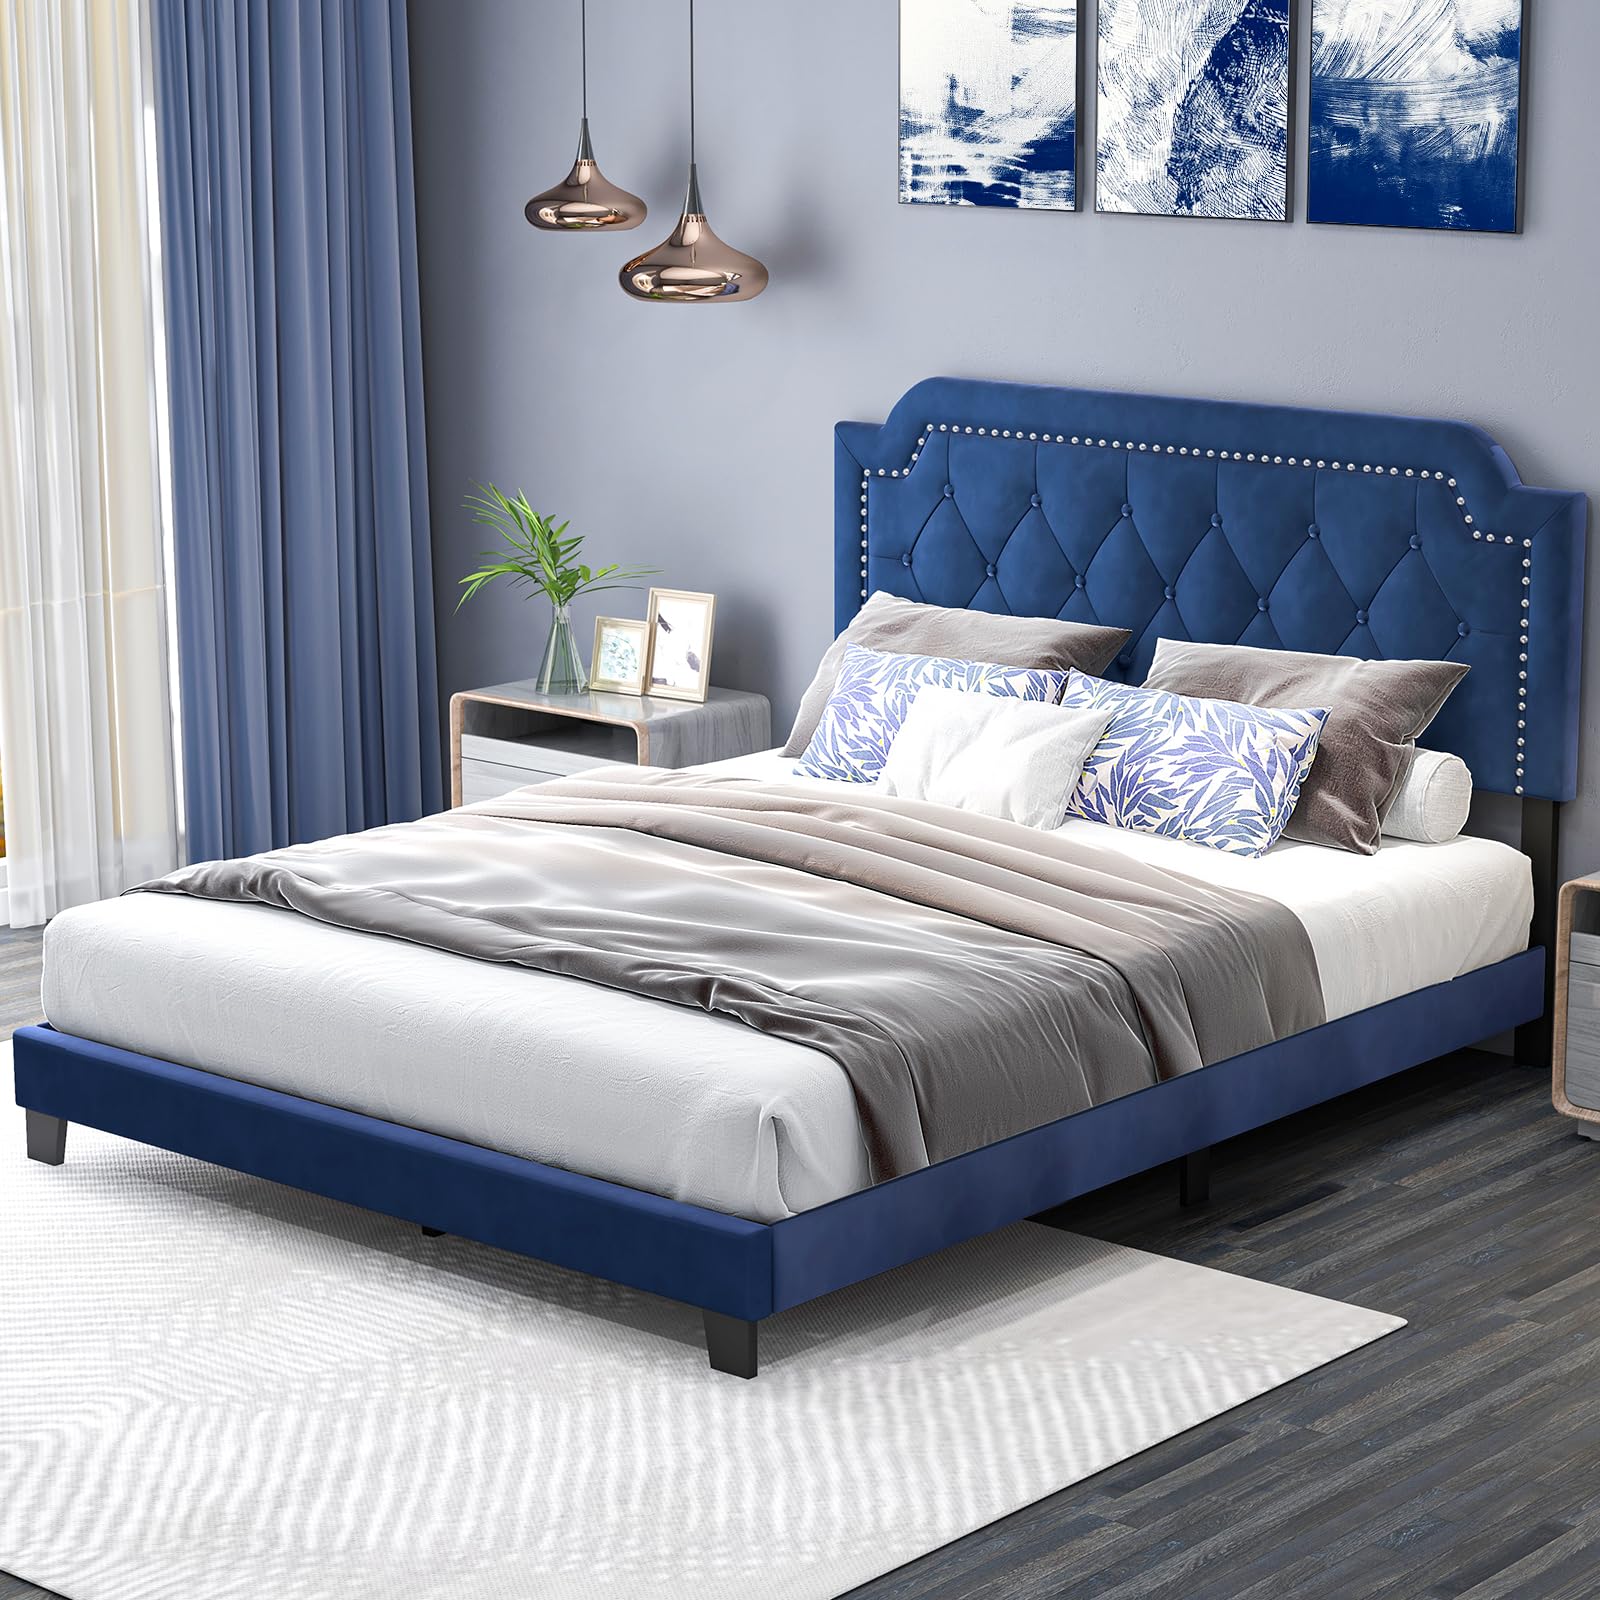 Giantex Velvet Queen Size Bed Frame, Upholstered Platform Bed with Button Tufted & Nailhead Trim Headboard